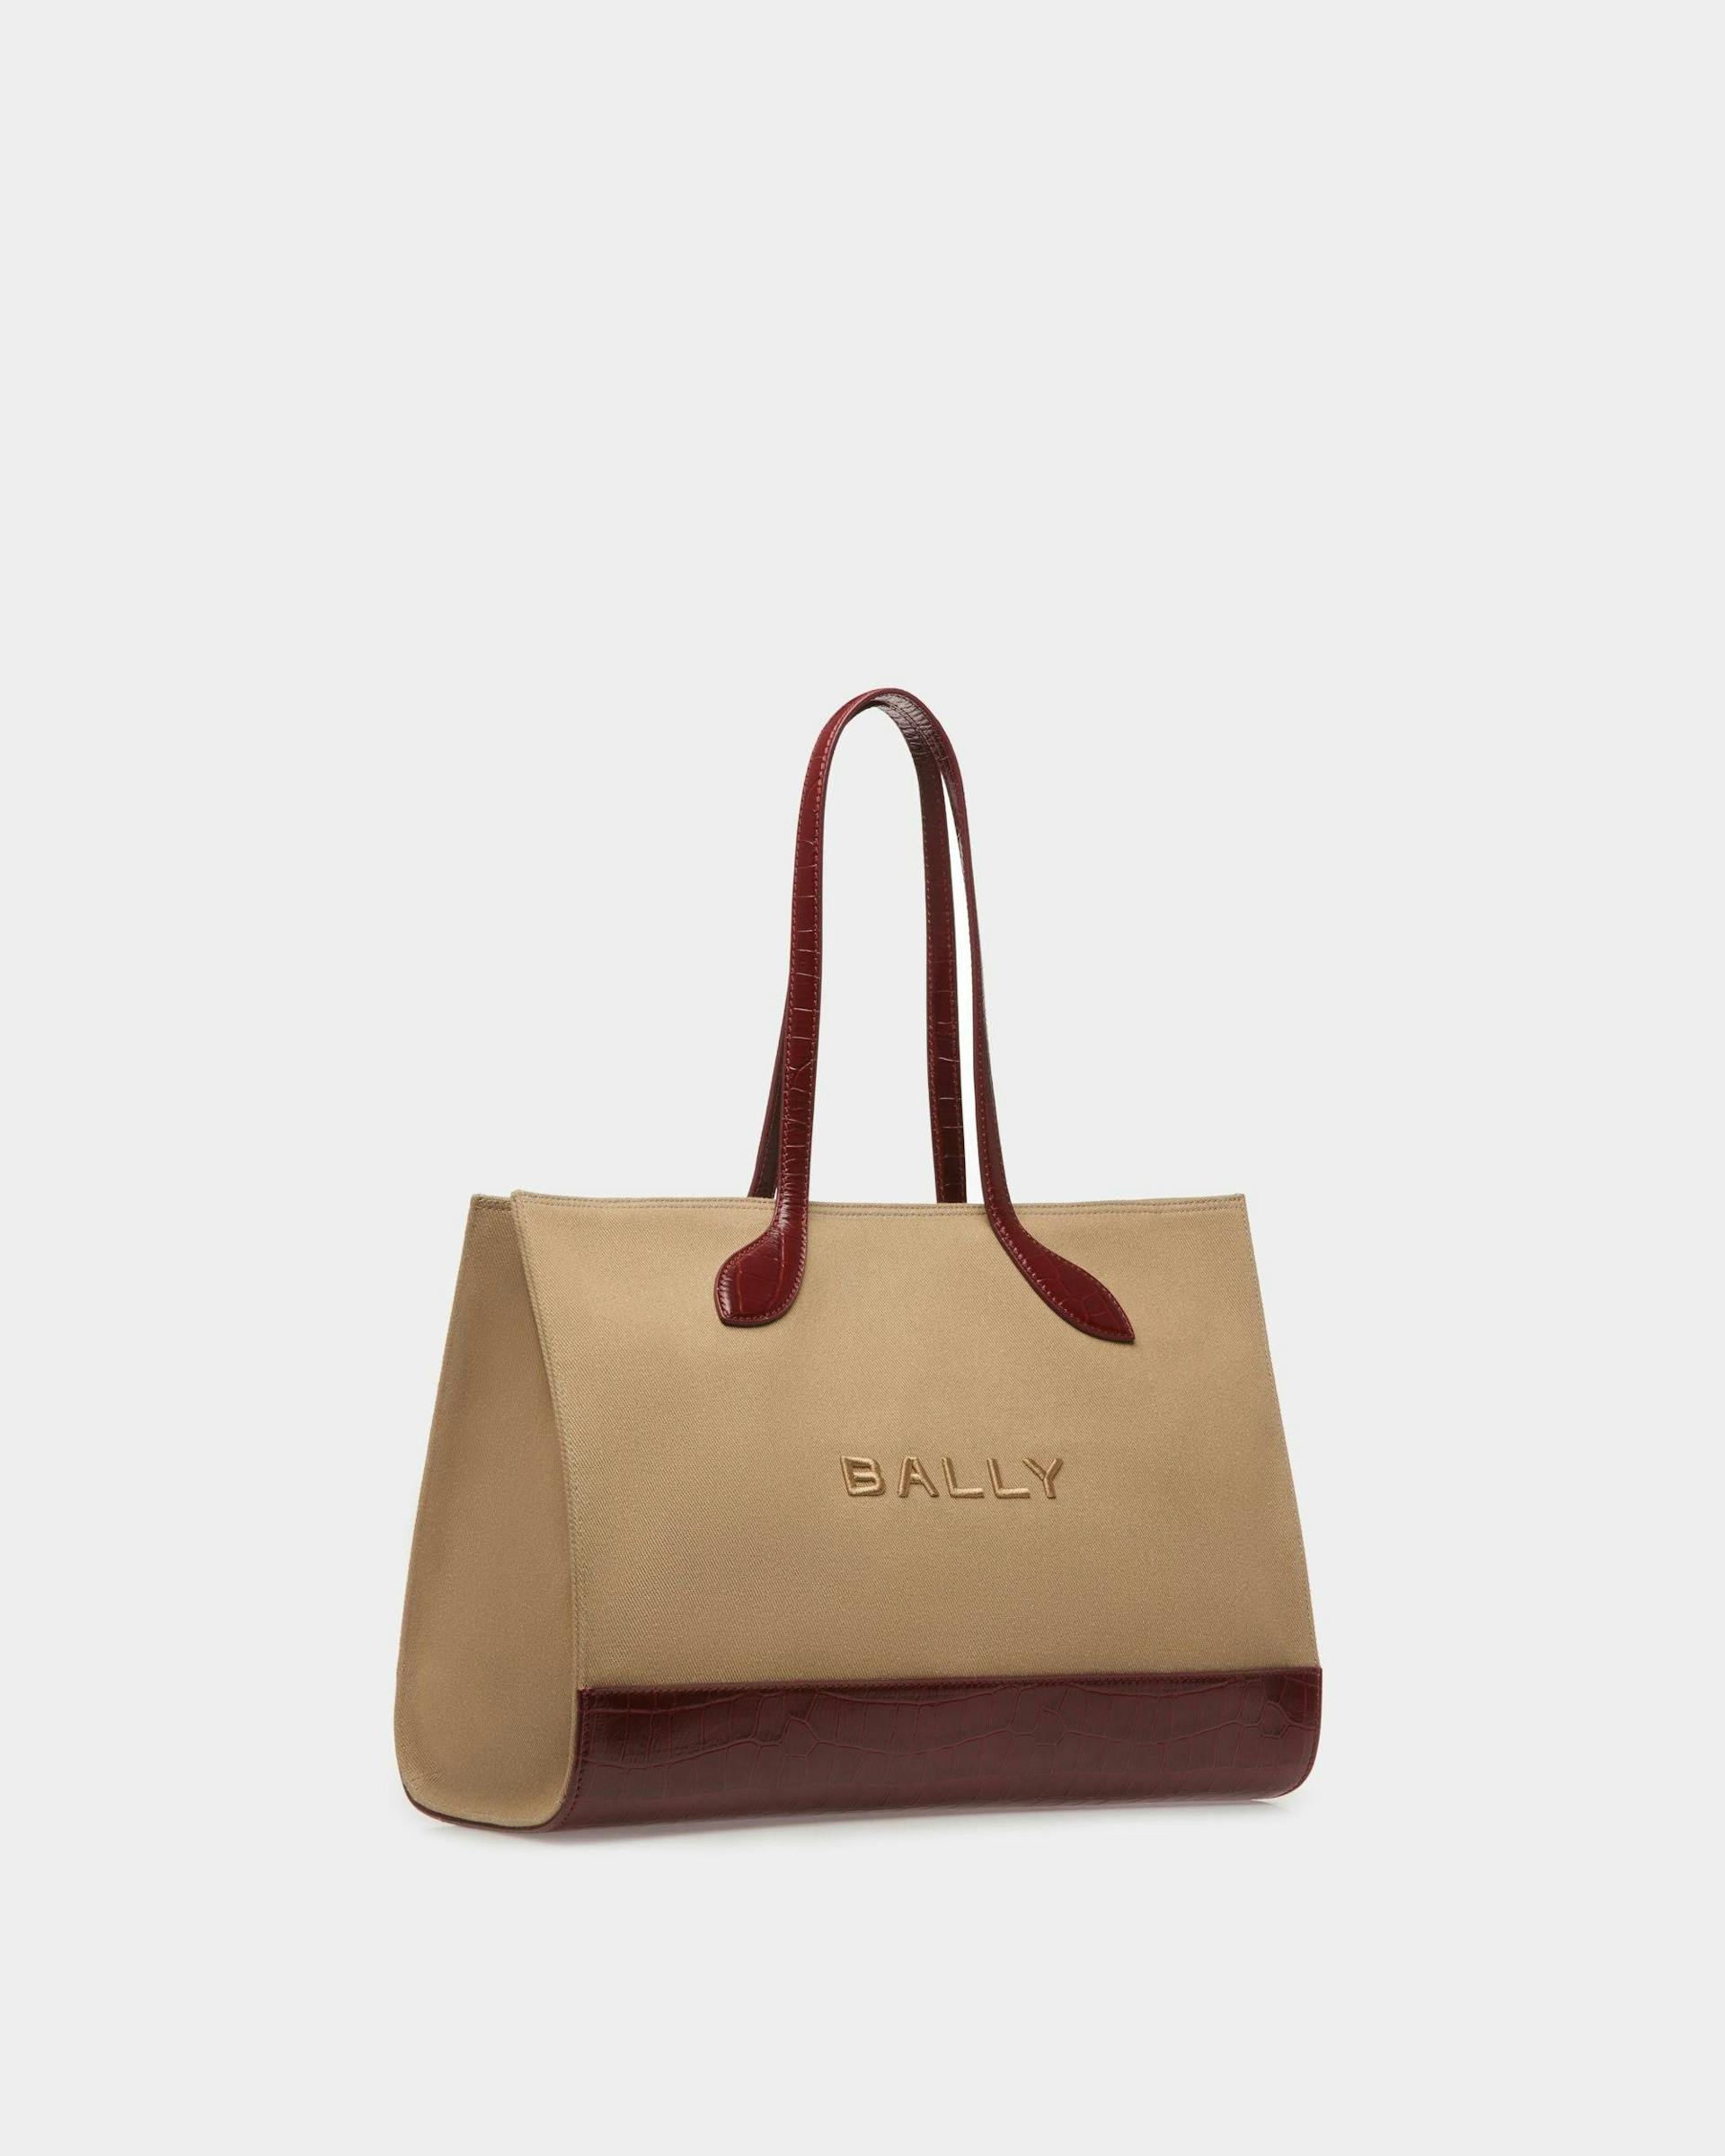 Bar Tote Bag In Sand And Burgundy Fabric - Women's - Bally - 04